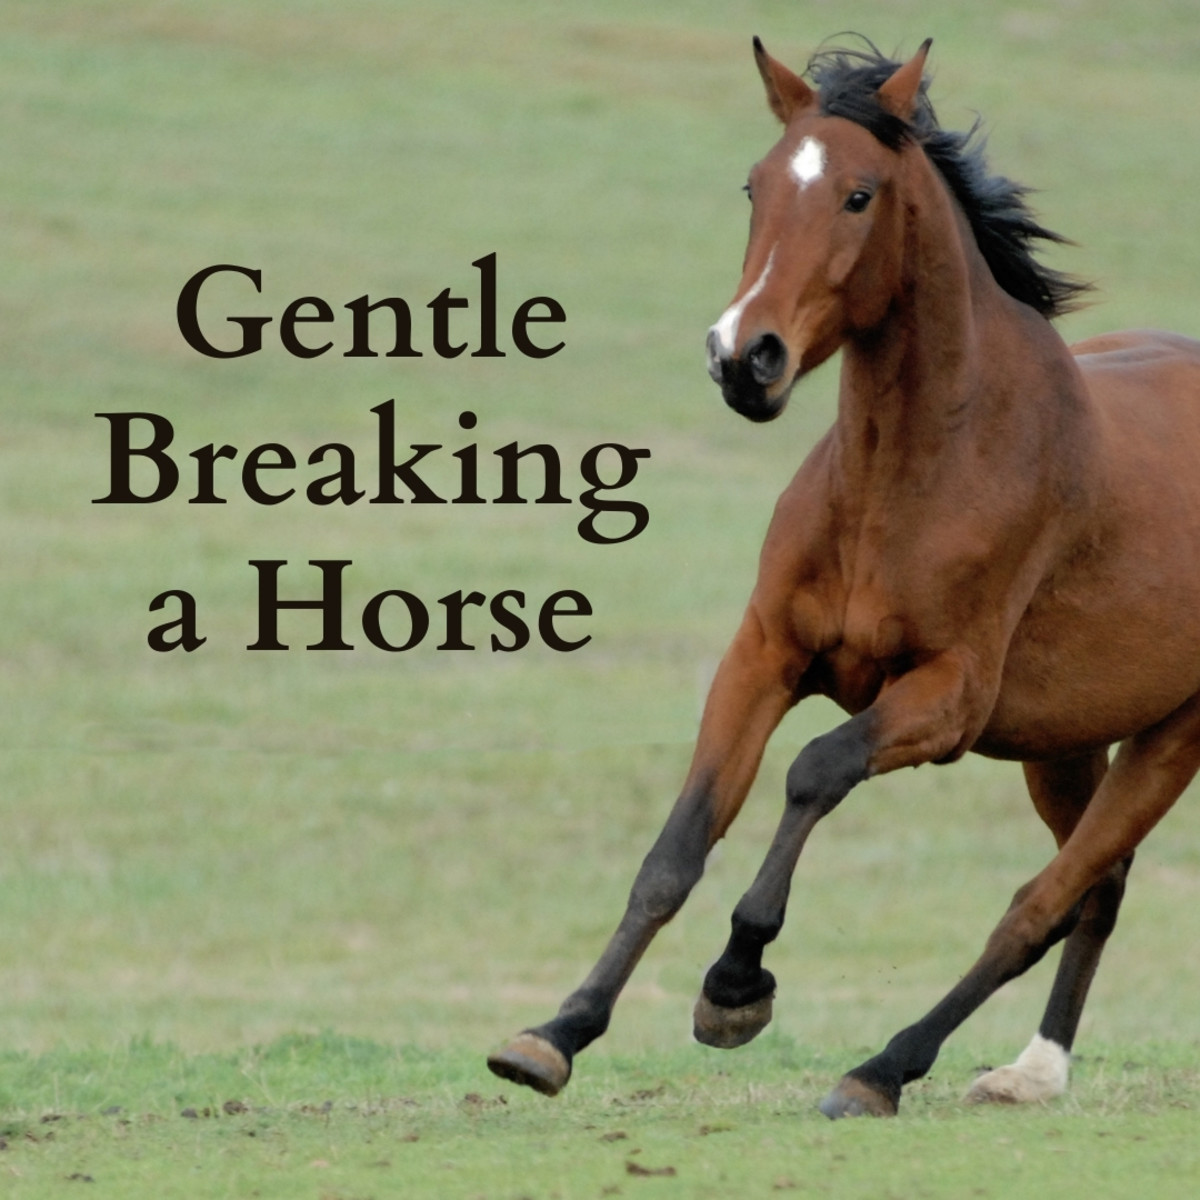 How to Gentle Break a Horse for Riding